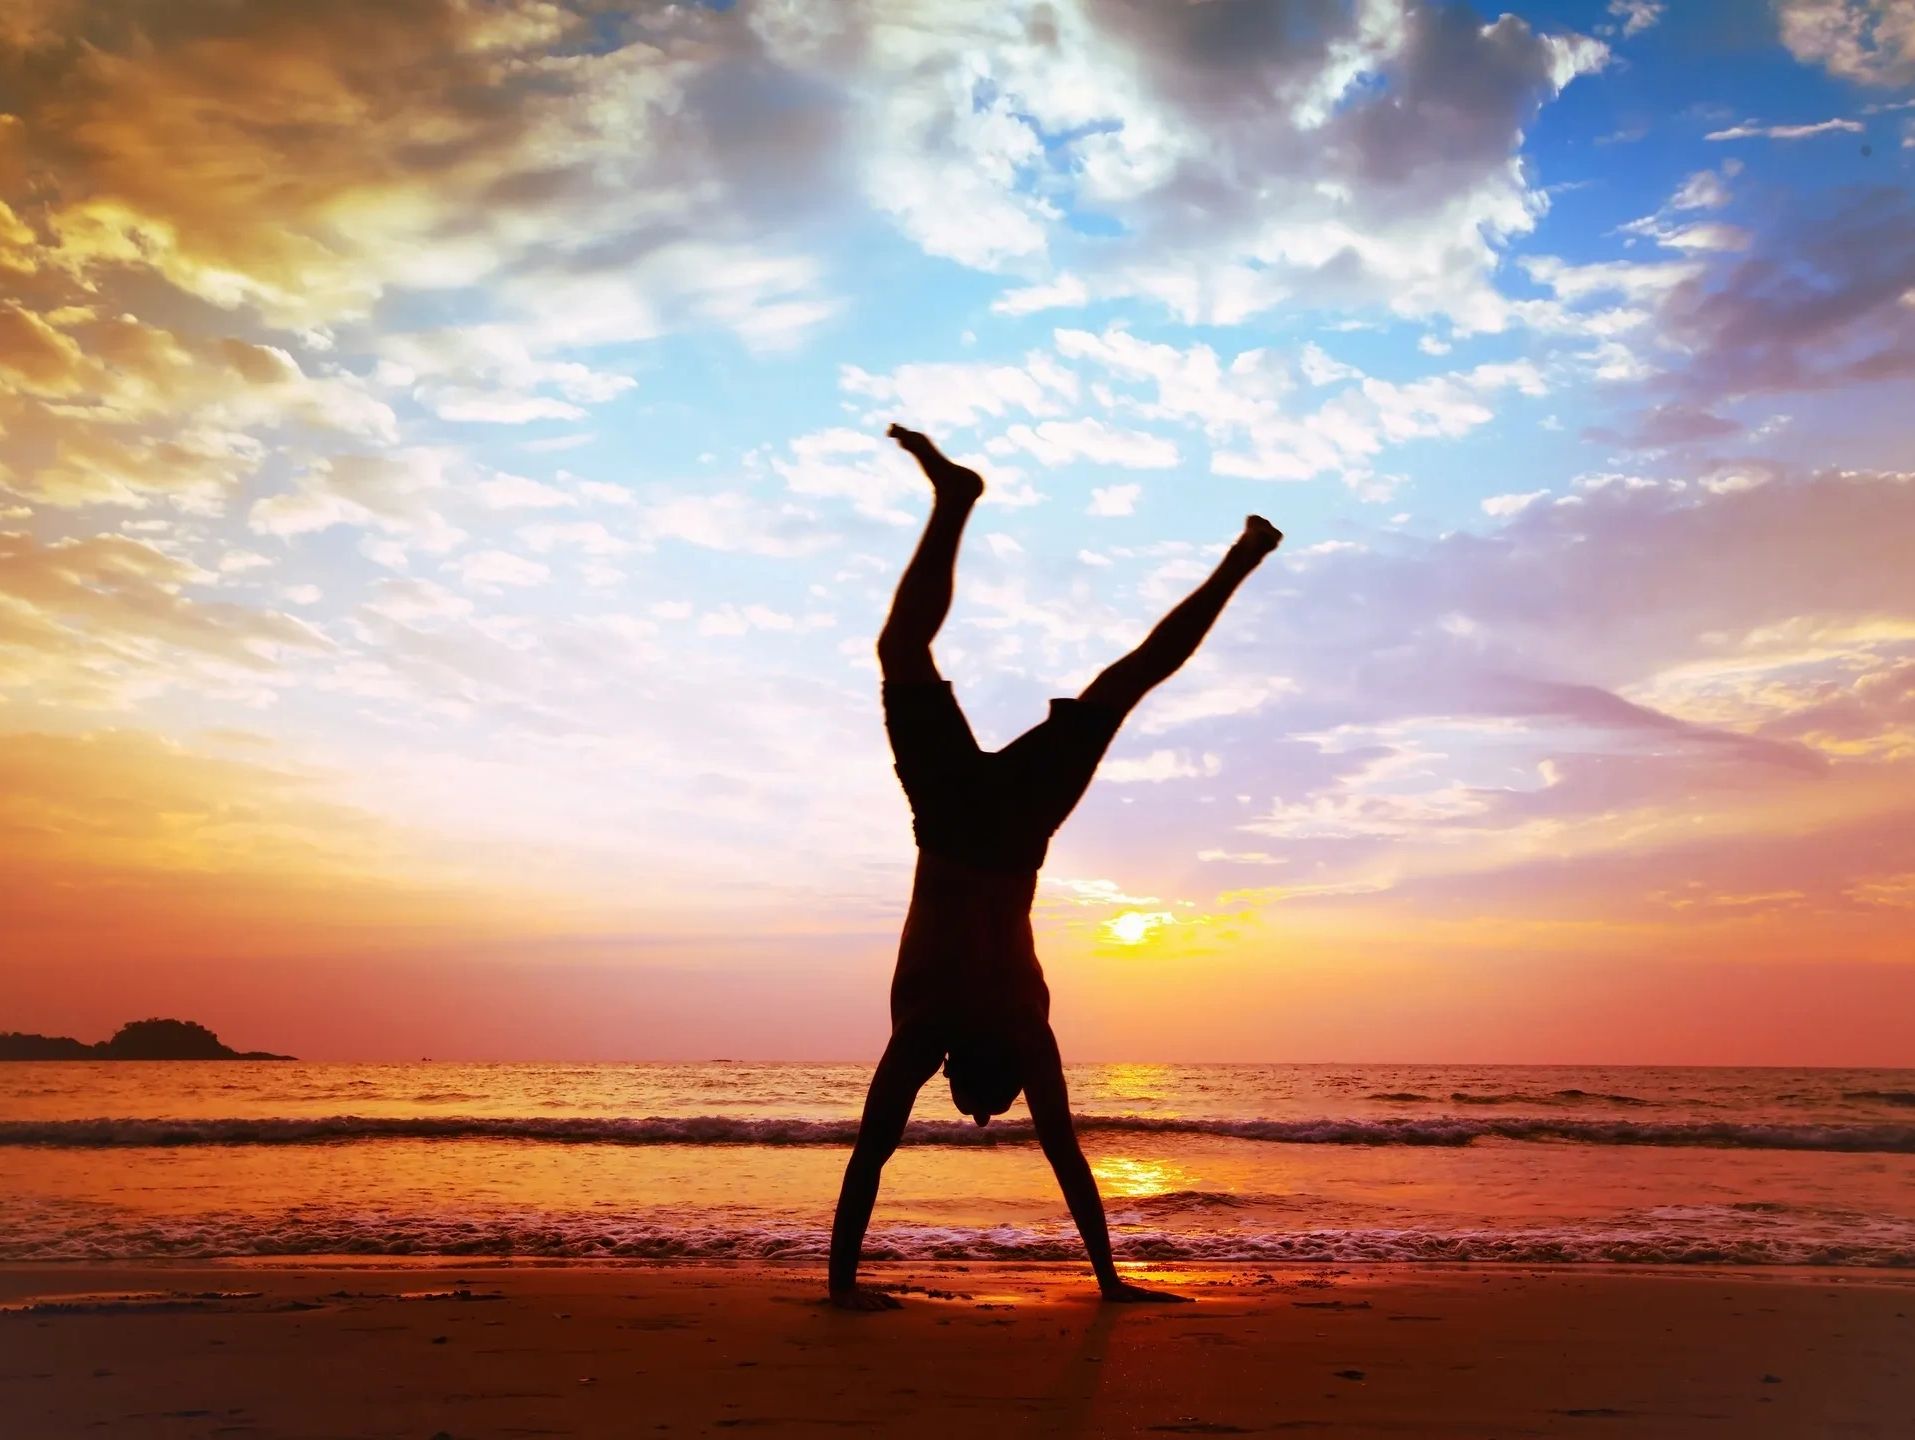 Image of a man on the beach doing a handstand with a sunset in the background